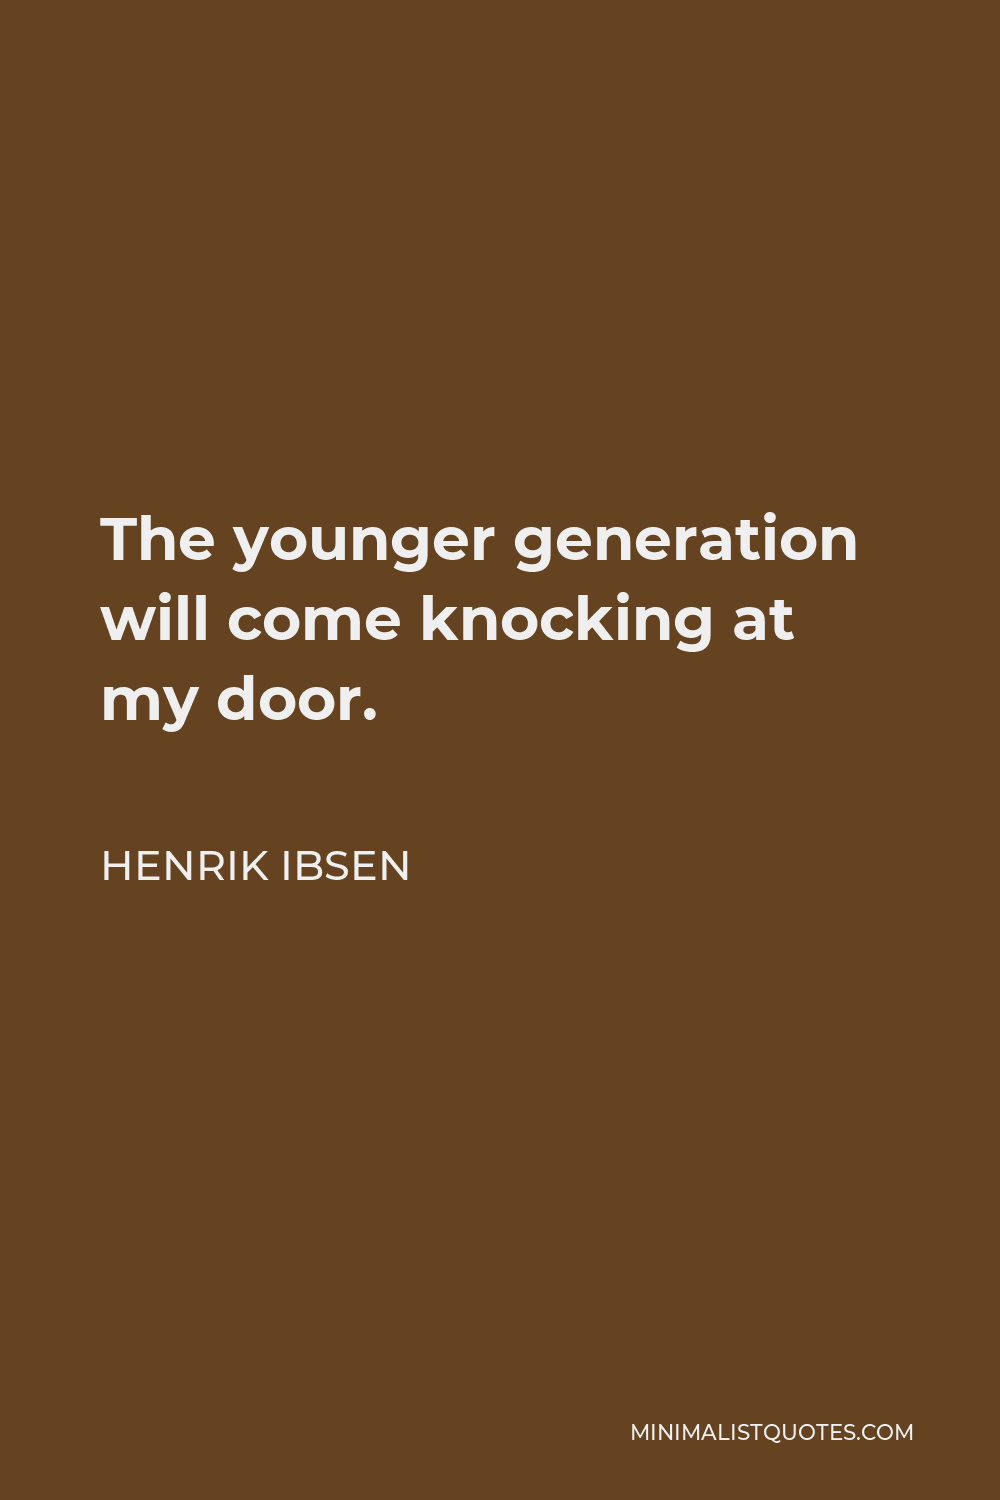 Henrik Ibsen Quote - The younger generation will come knocking at my door.